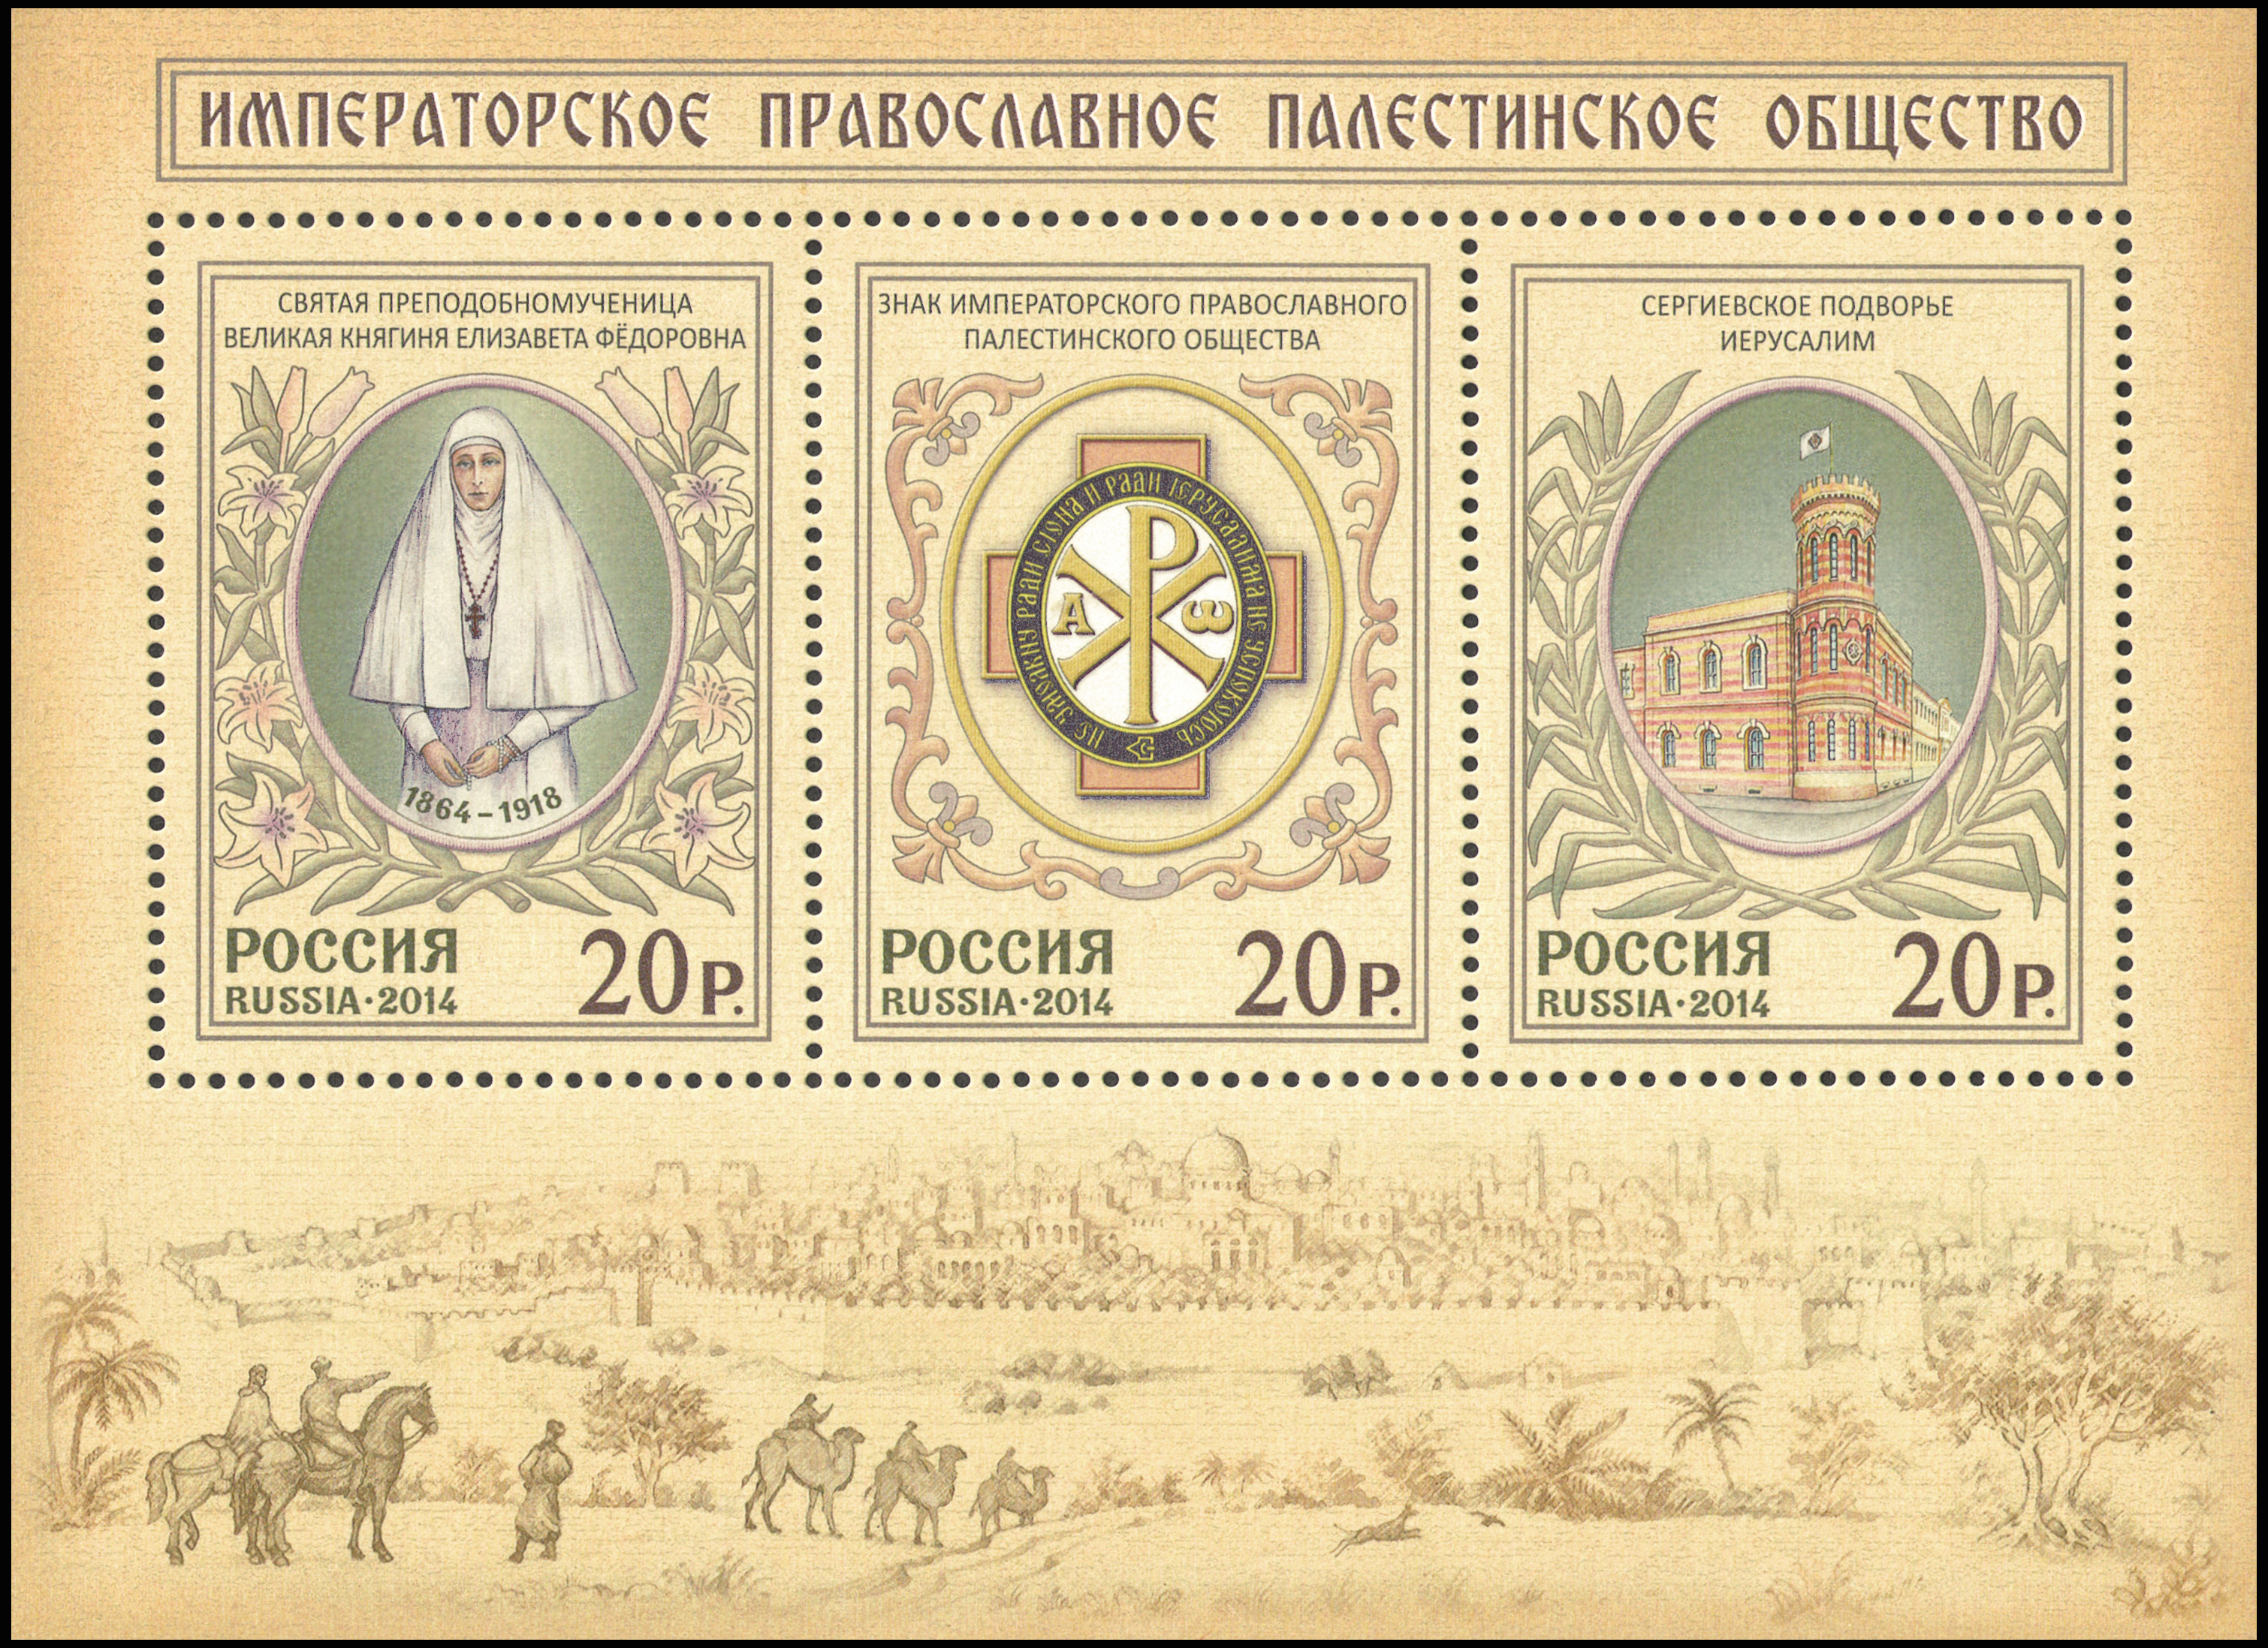 Stamps of Russia 2014 No 1885-1887 Imperial Orthodox Palestine Society